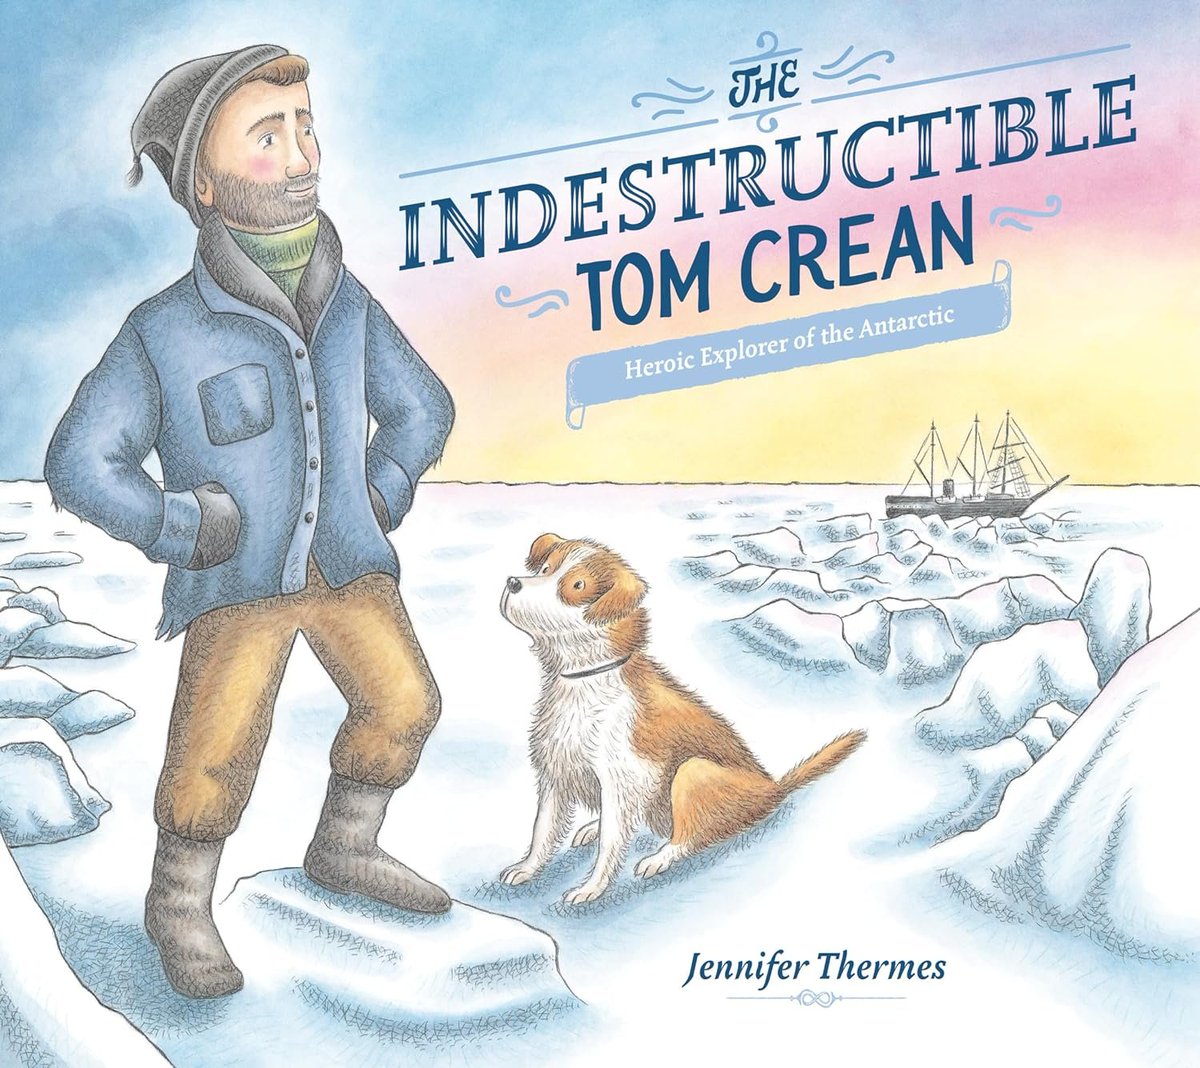 When reading this #picturebook to my fifth graders for #classroombookaday they were on the edges of their seats. When I finished, they clapped and cheered. A great, inspirational #biography @jenthermes